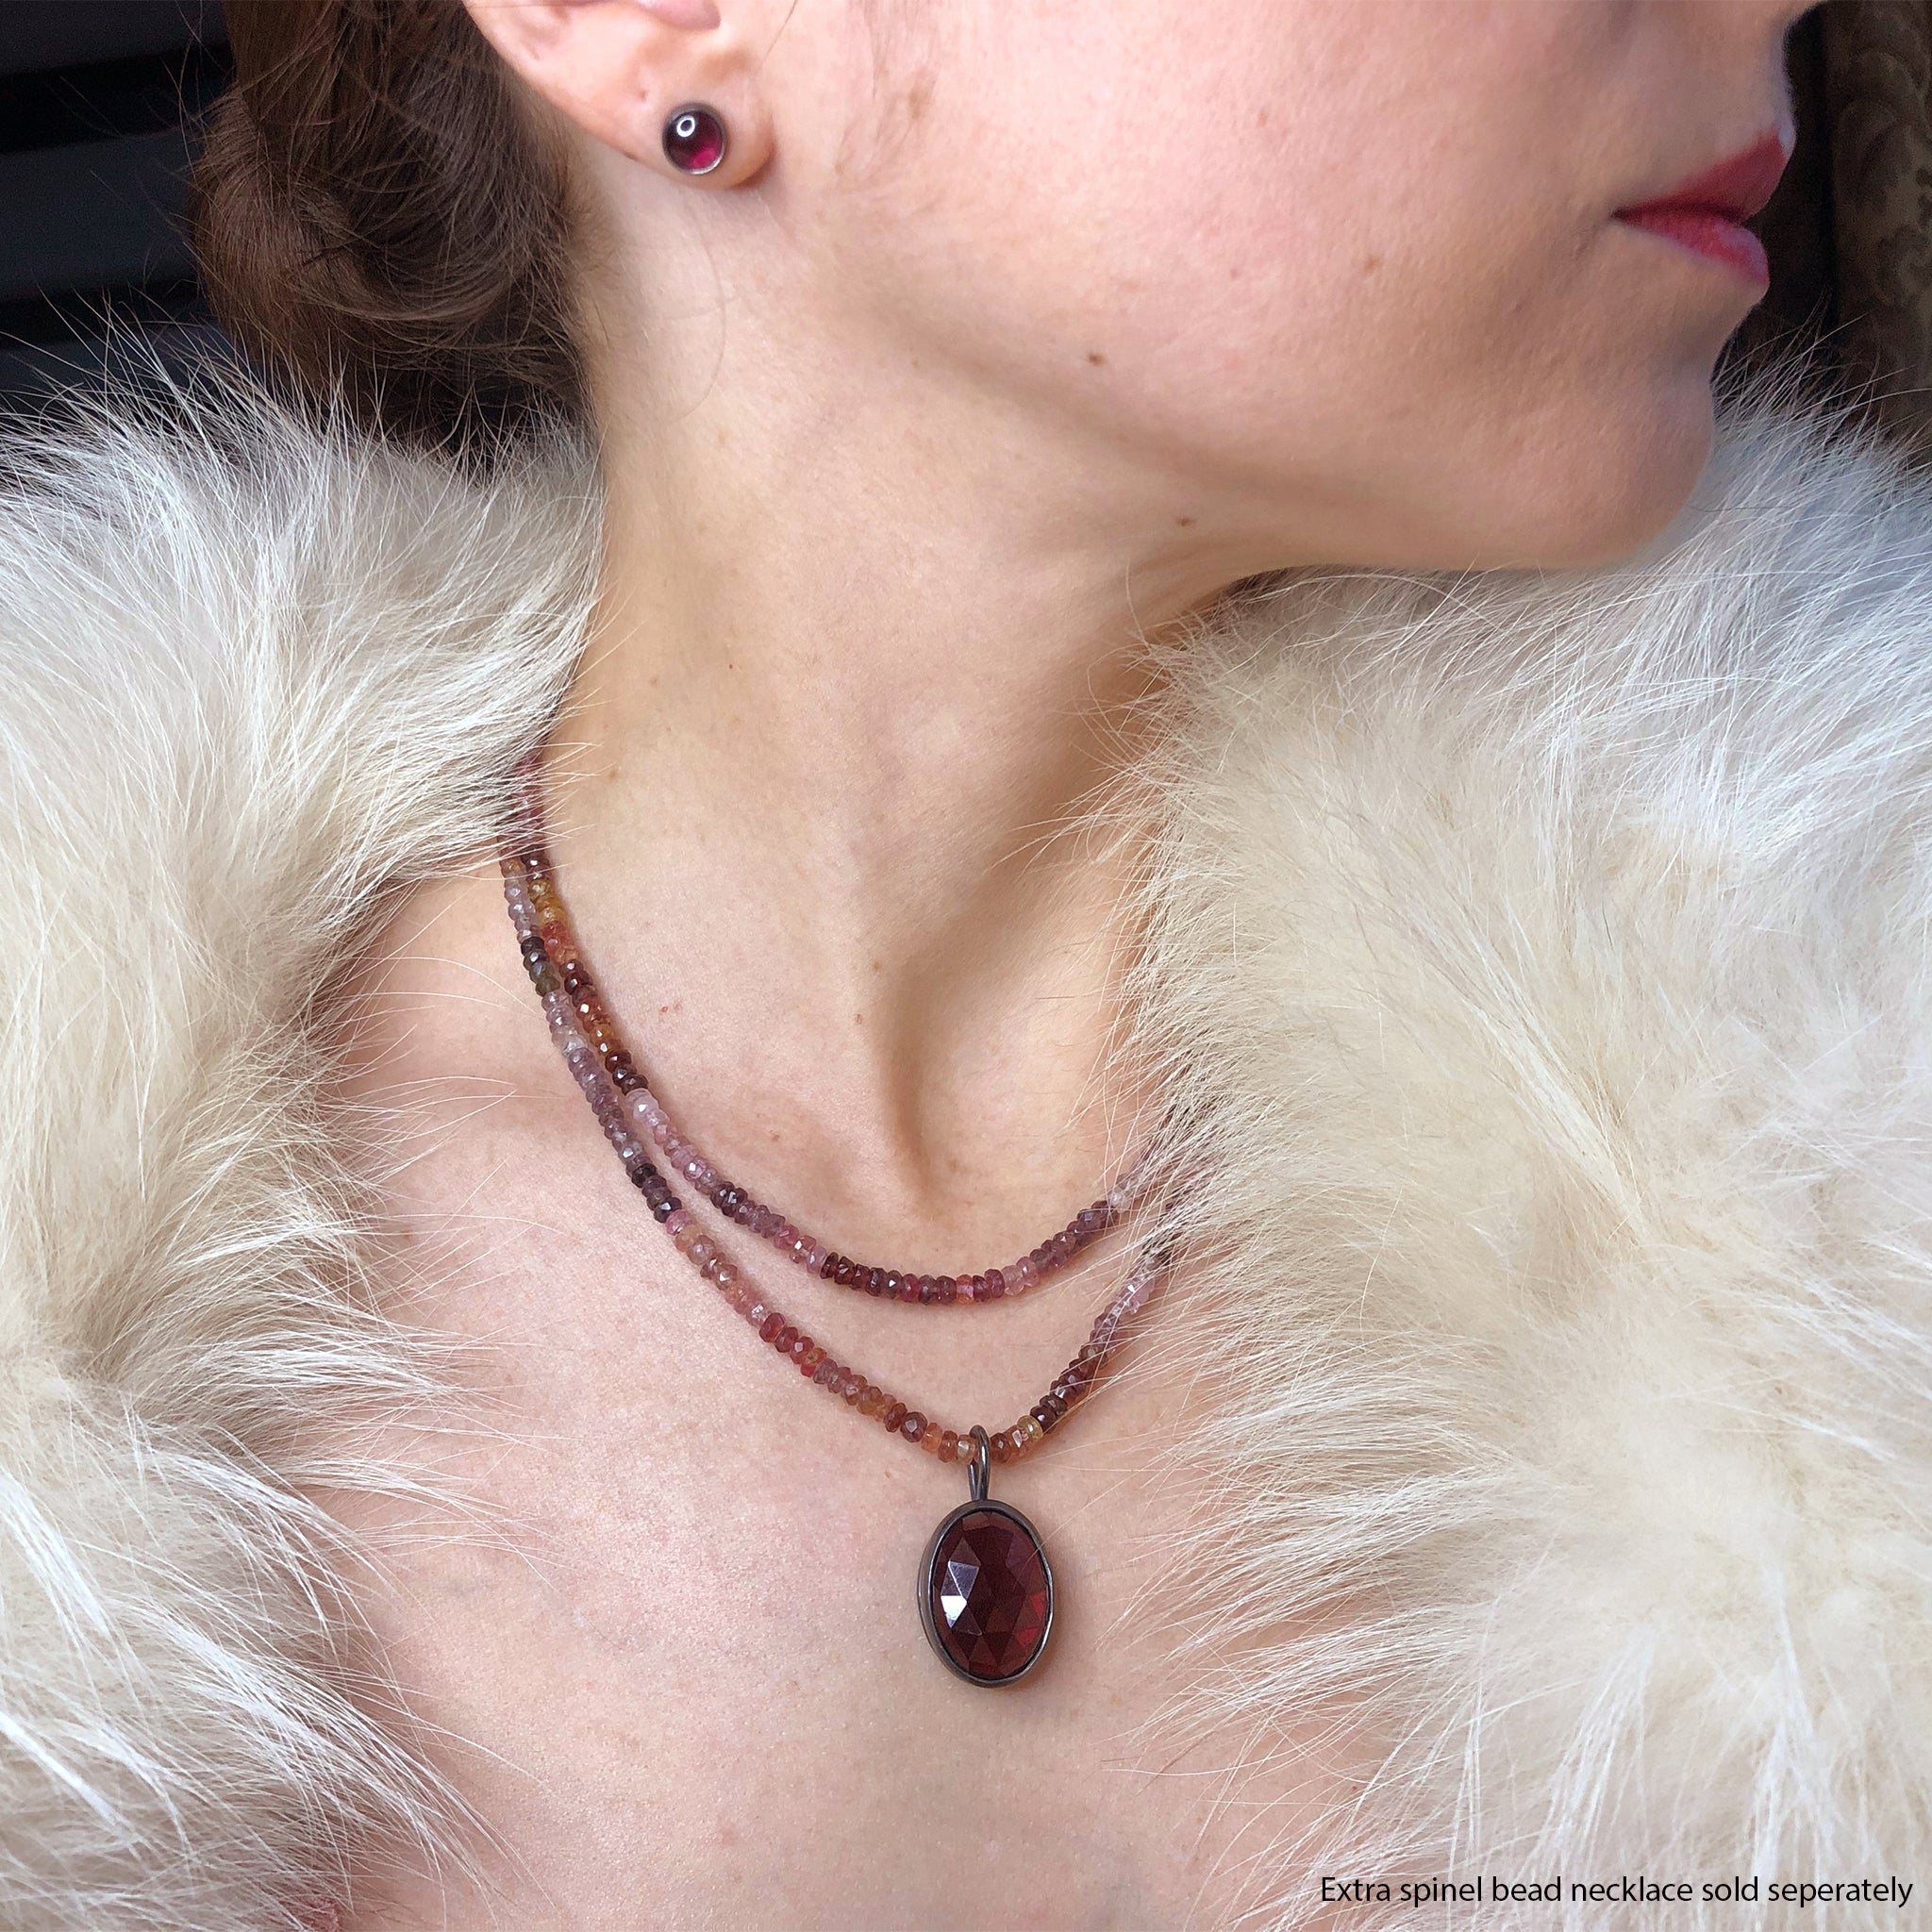 Red Garnet Pendant Necklace with Spinel Beads. "Enamored Adornments" Collection by Alex Lozier Jewelry.